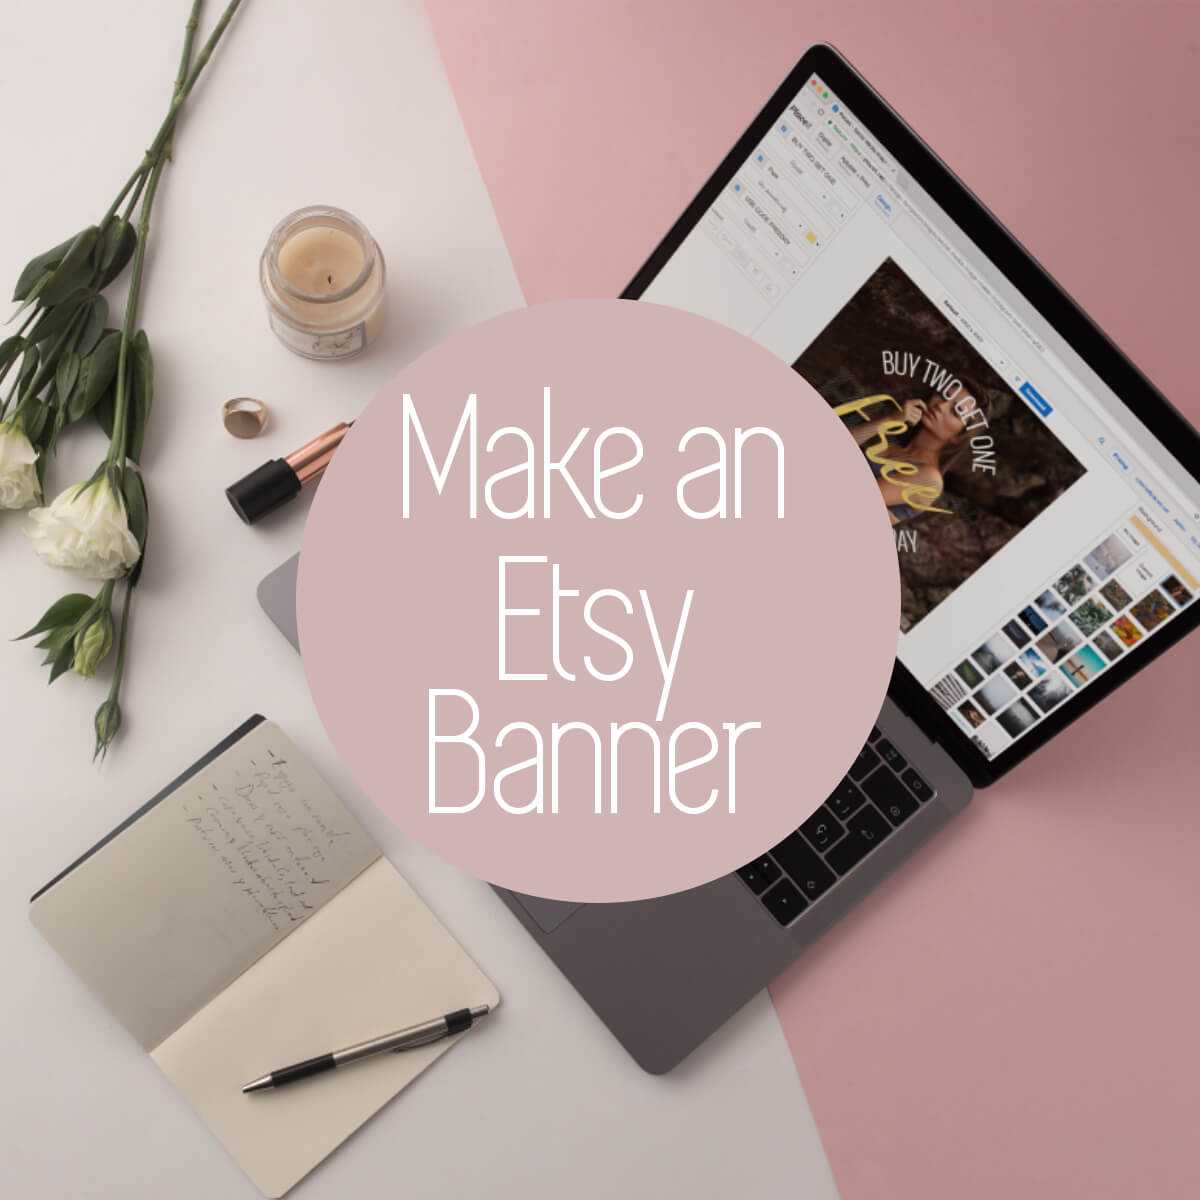 Personalize Your Etsy Shop - Cover Photos And Banners In Free Etsy Banner Template